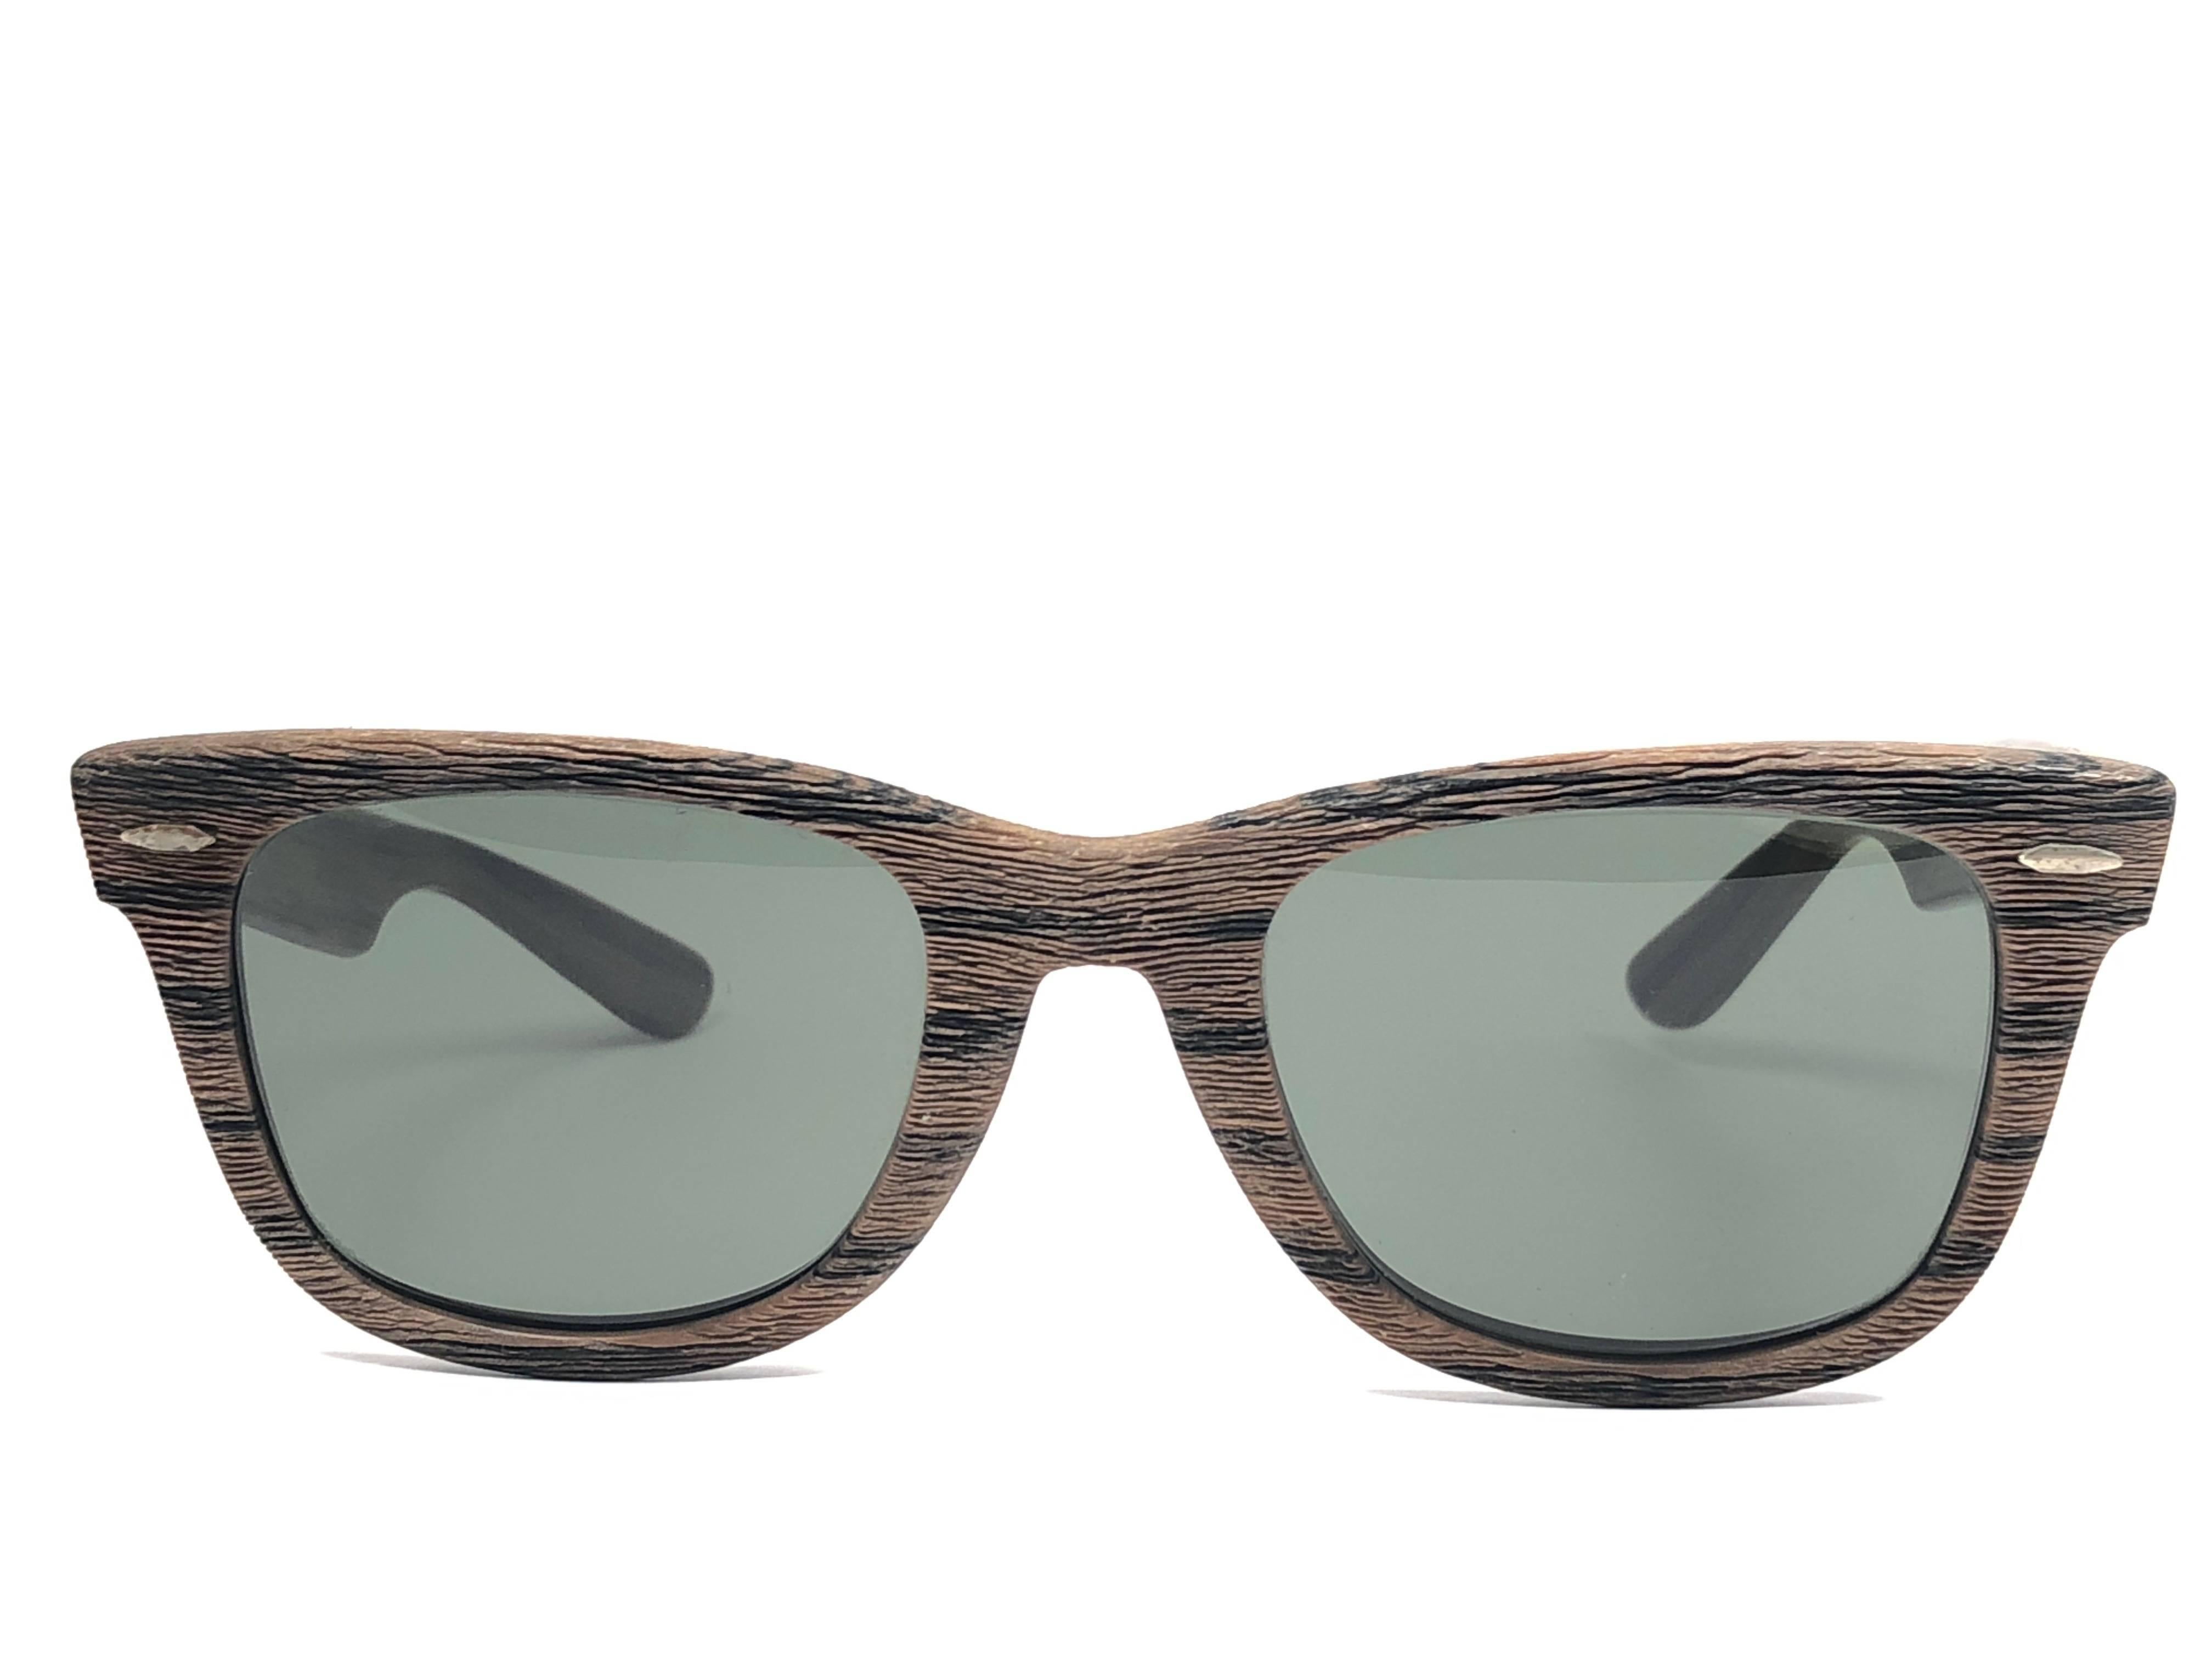 New and Rare collectors item the ultra rare edition of the classic Wayfarer: The Woodies. 
These were made in 3 colors, from light brown to dark brown. These are the dark Tiki edition. Sporting G15 GREY lenses. 5022, the classic size. 
Frame is